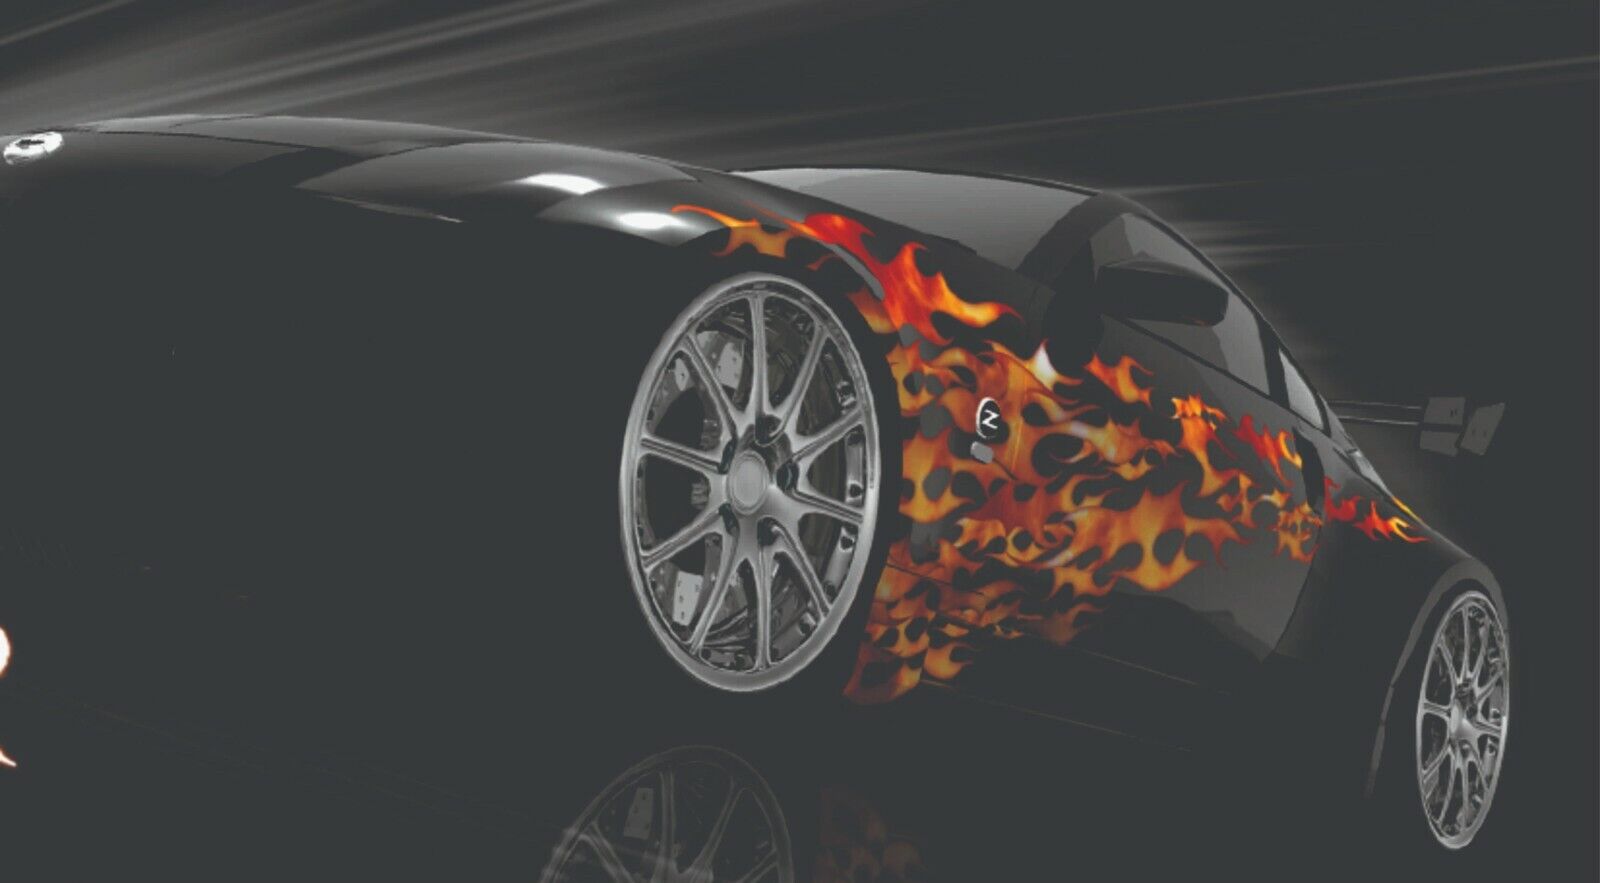 Flames Fire wrap Car Truck Trailer Graphics Decals Stickers Wrap 75" x 24"